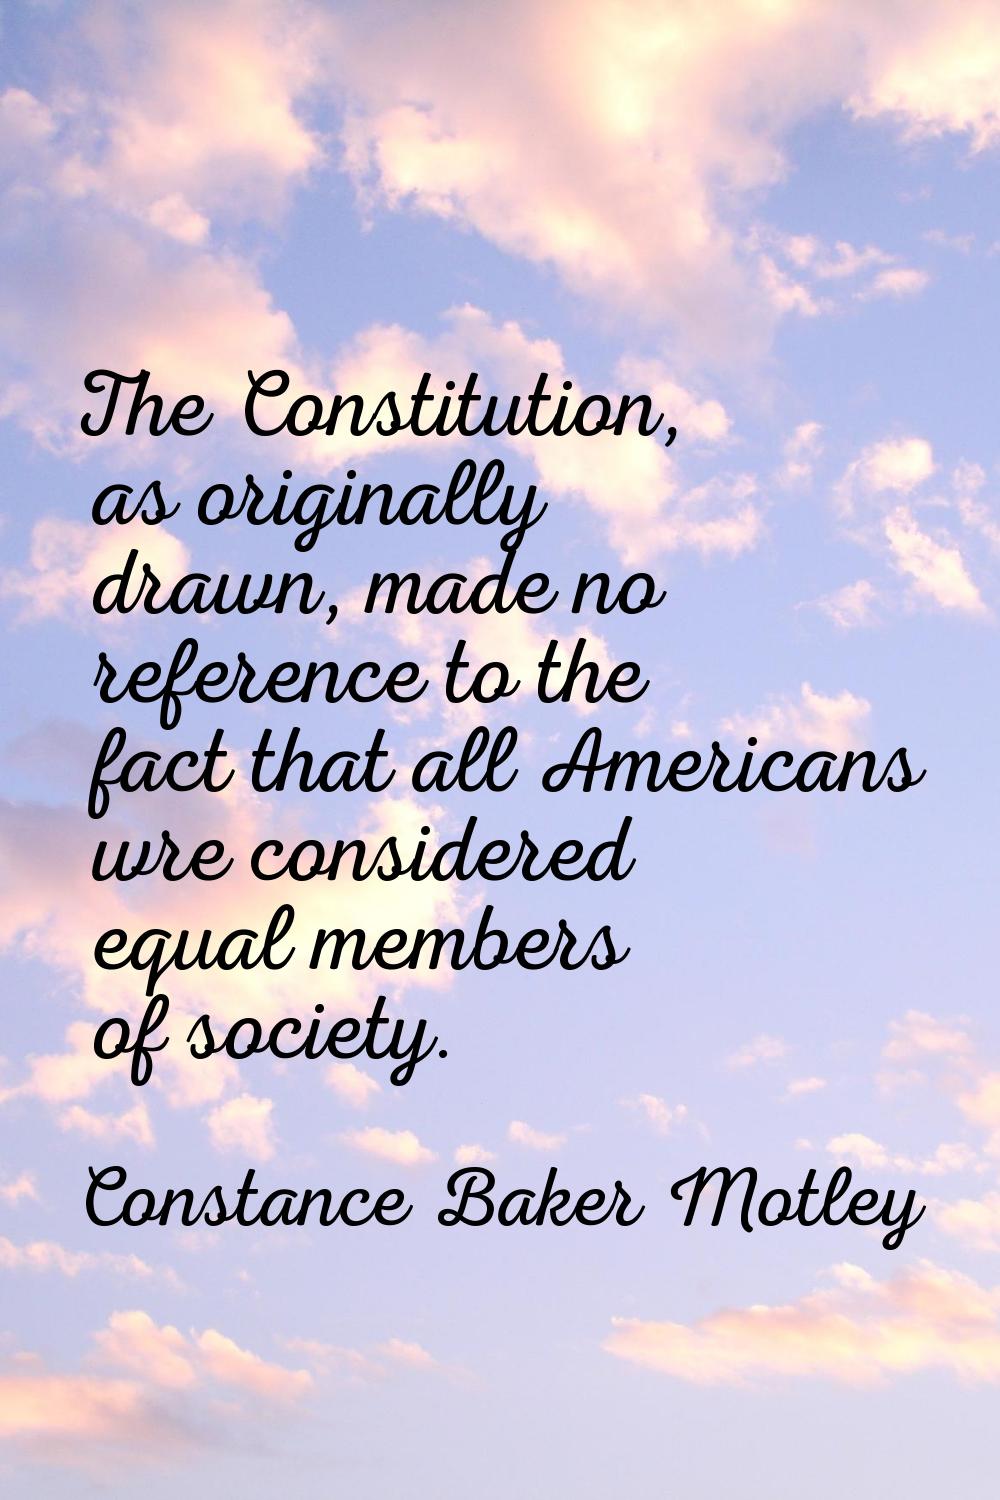 The Constitution, as originally drawn, made no reference to the fact that all Americans wre conside